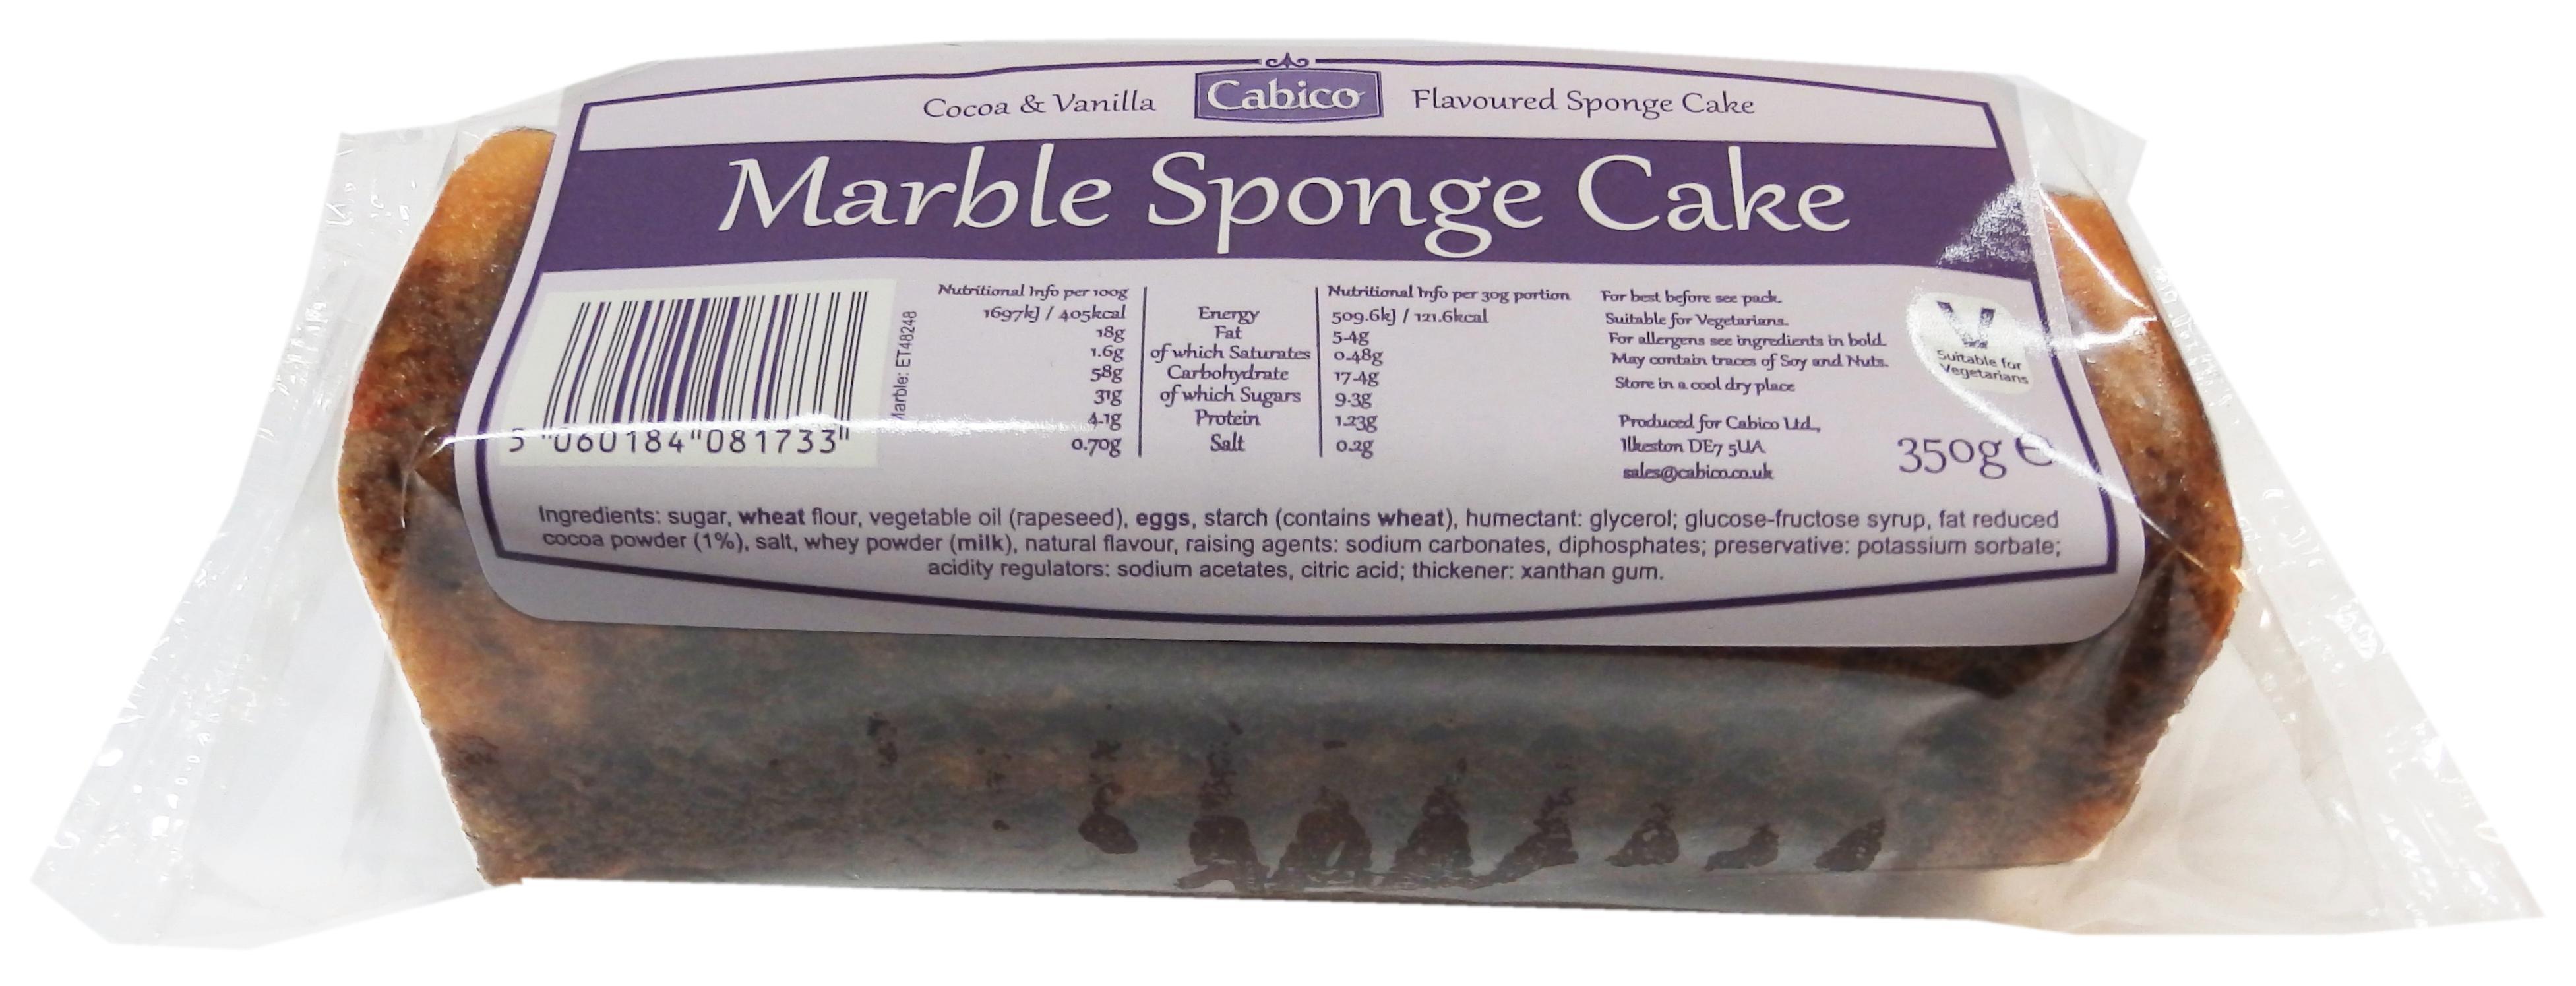 Cabico Marble Sponge Cake 350g (Aug 23) RRP £1.39 CLEARANCE XL 89p or 2 for £1.50